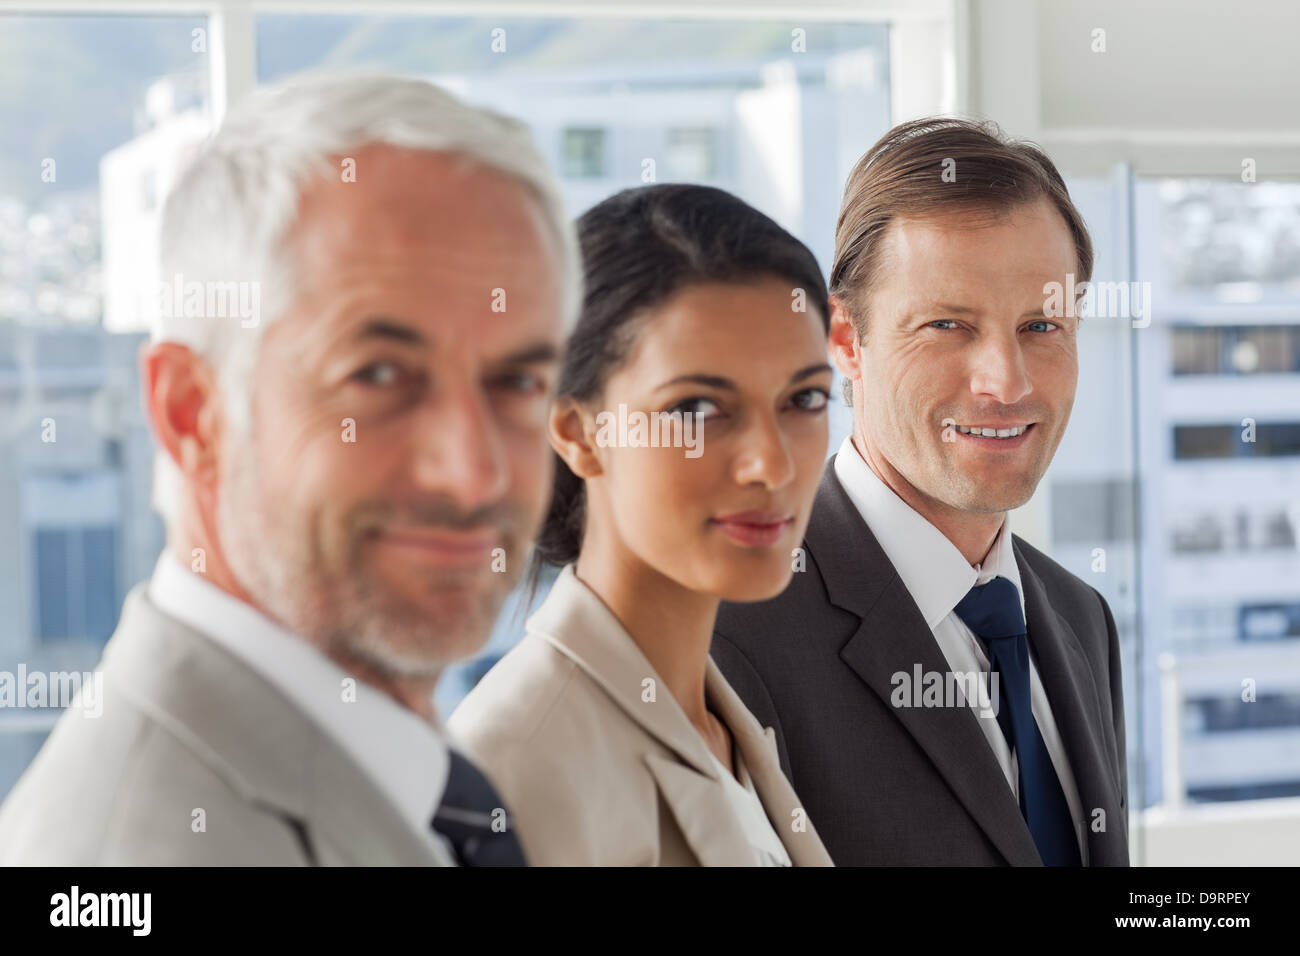 Serious business people looking in the same way Stock Photo